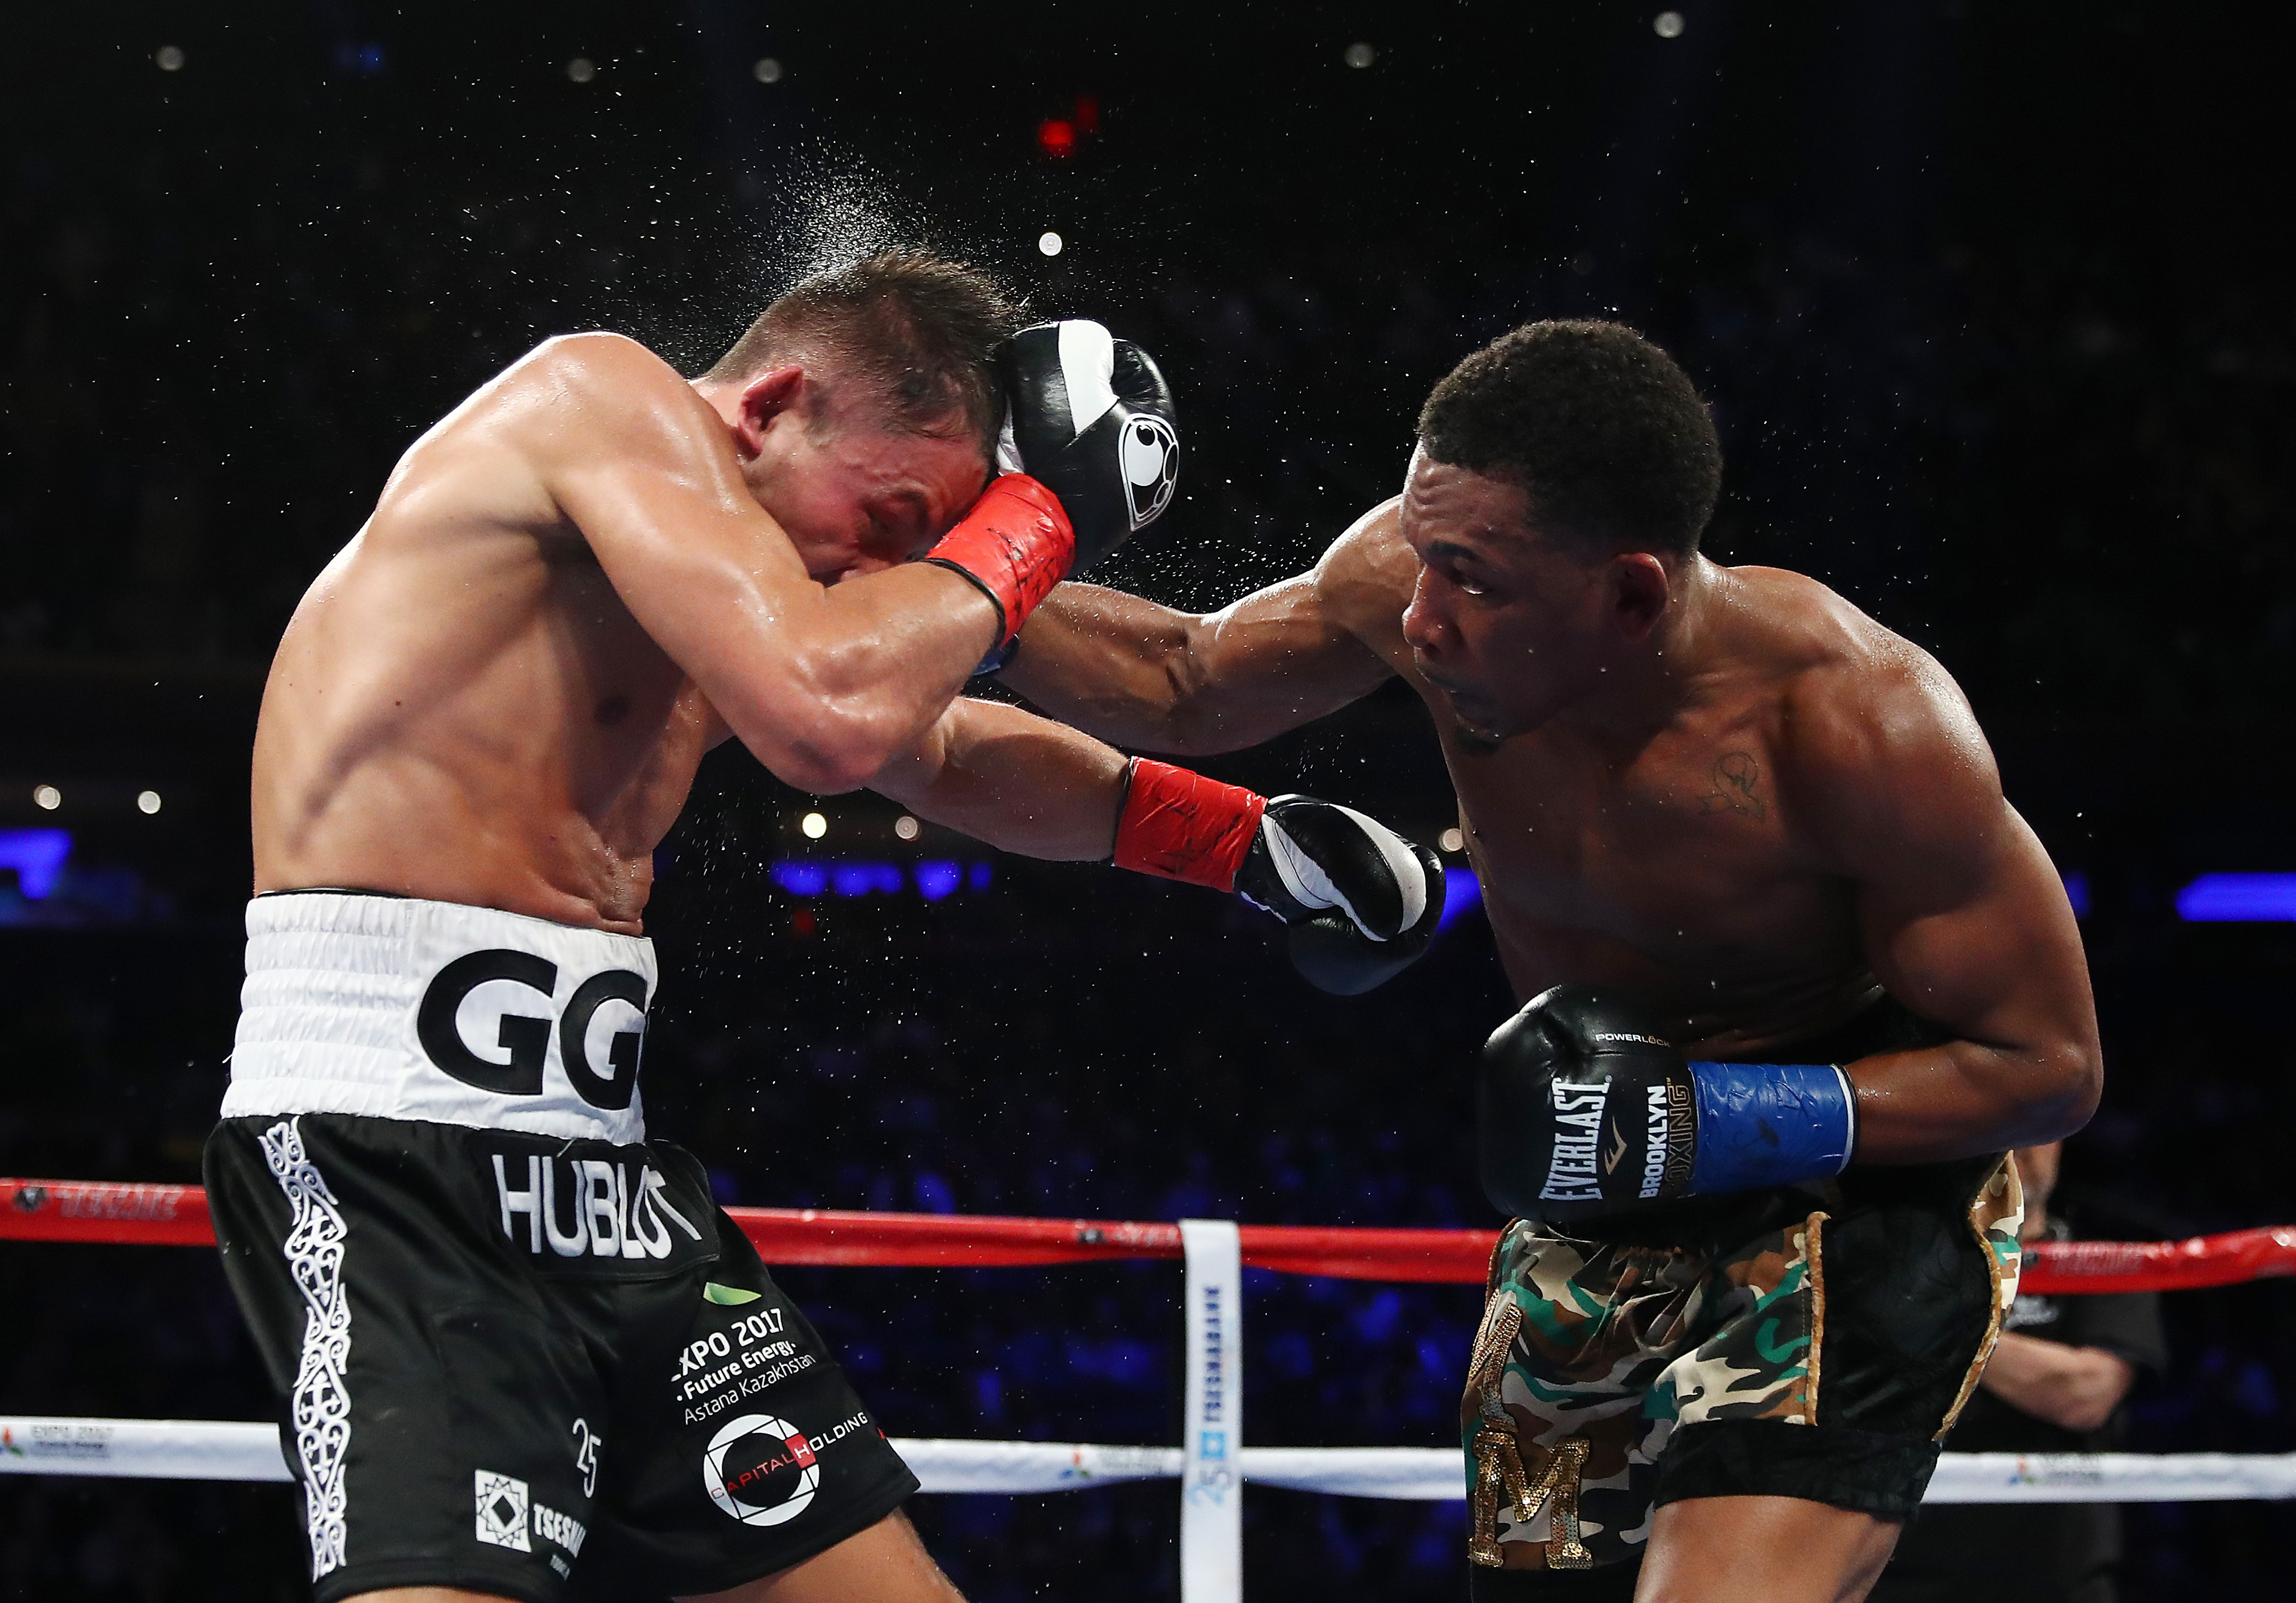 NEW YORK, NY - MARCH 18: Daniel Jacobs punches Gennady Golovkin during their Championship fight for Golovkin's WBA/WBC/IBF middleweight title at Madison Square Garden on March 18, 2017 in New York City. (Photo by Al Bello/Getty Images)